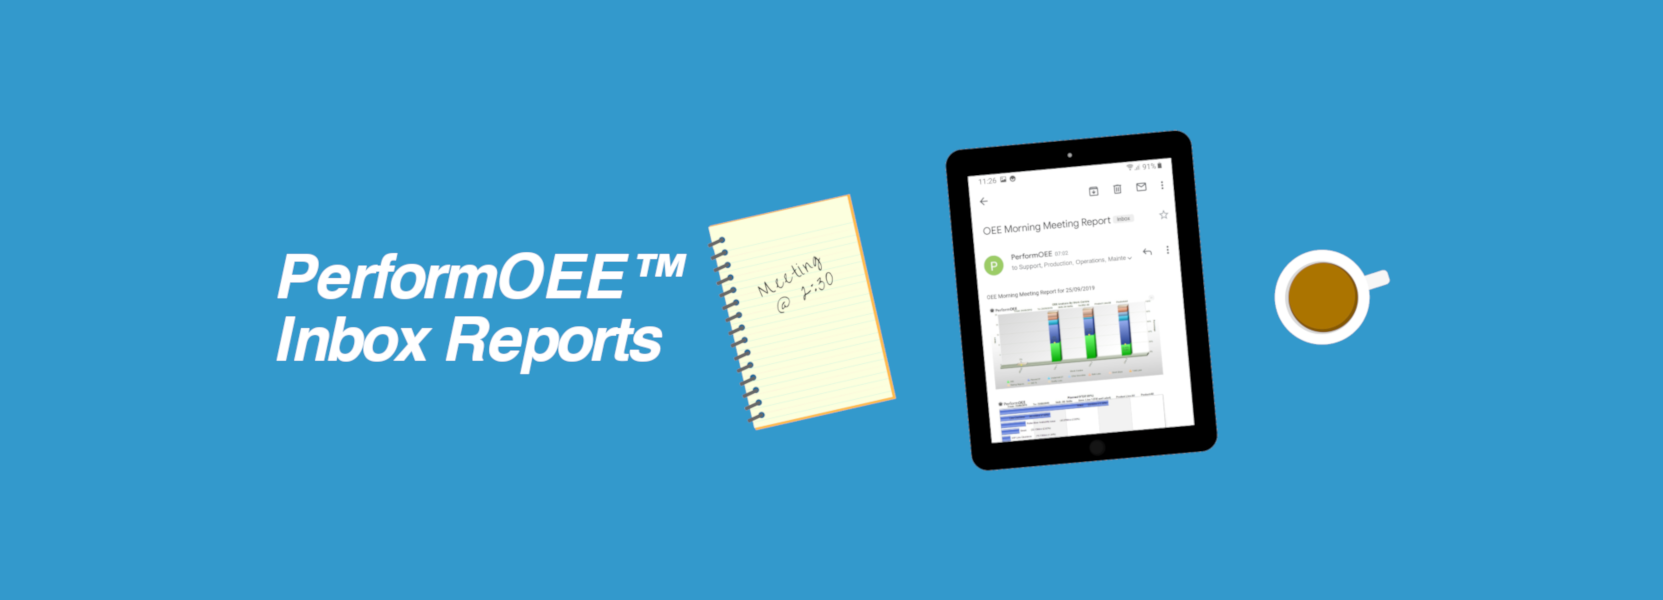 PerformOEE™ Inbox Reports - Automated Email Reports | OEEsystems